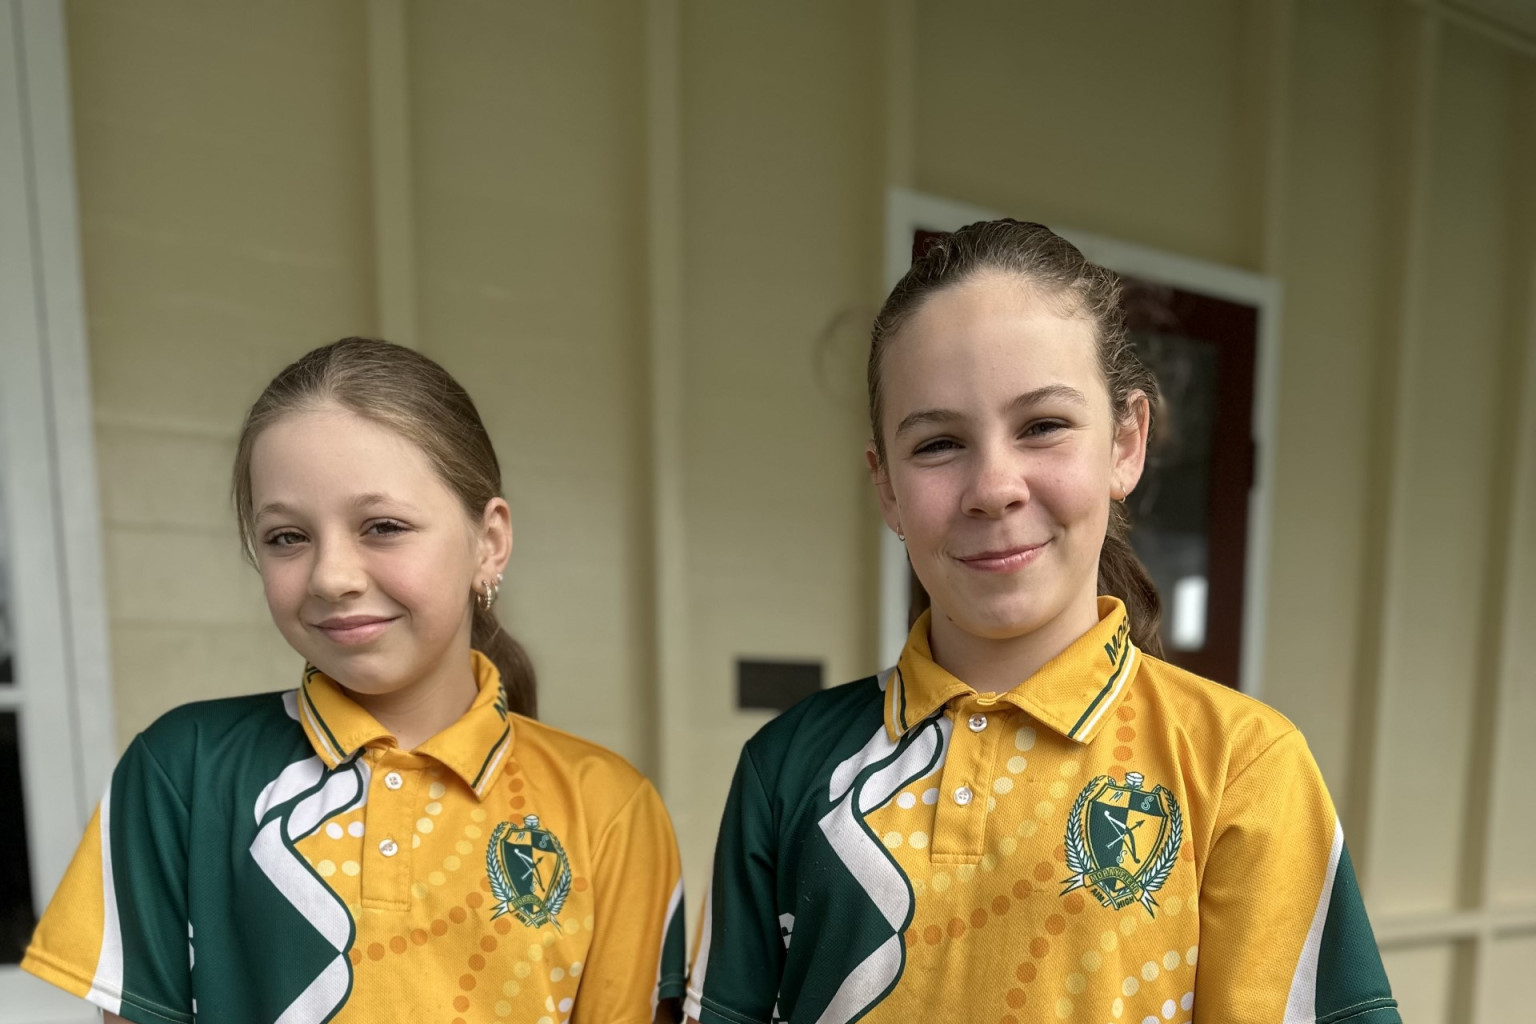 Morayfield State School captains Harlee and Stevie-Lee are looking forward to welcoming everyone on Saturday for the school’s 150th anniversary.